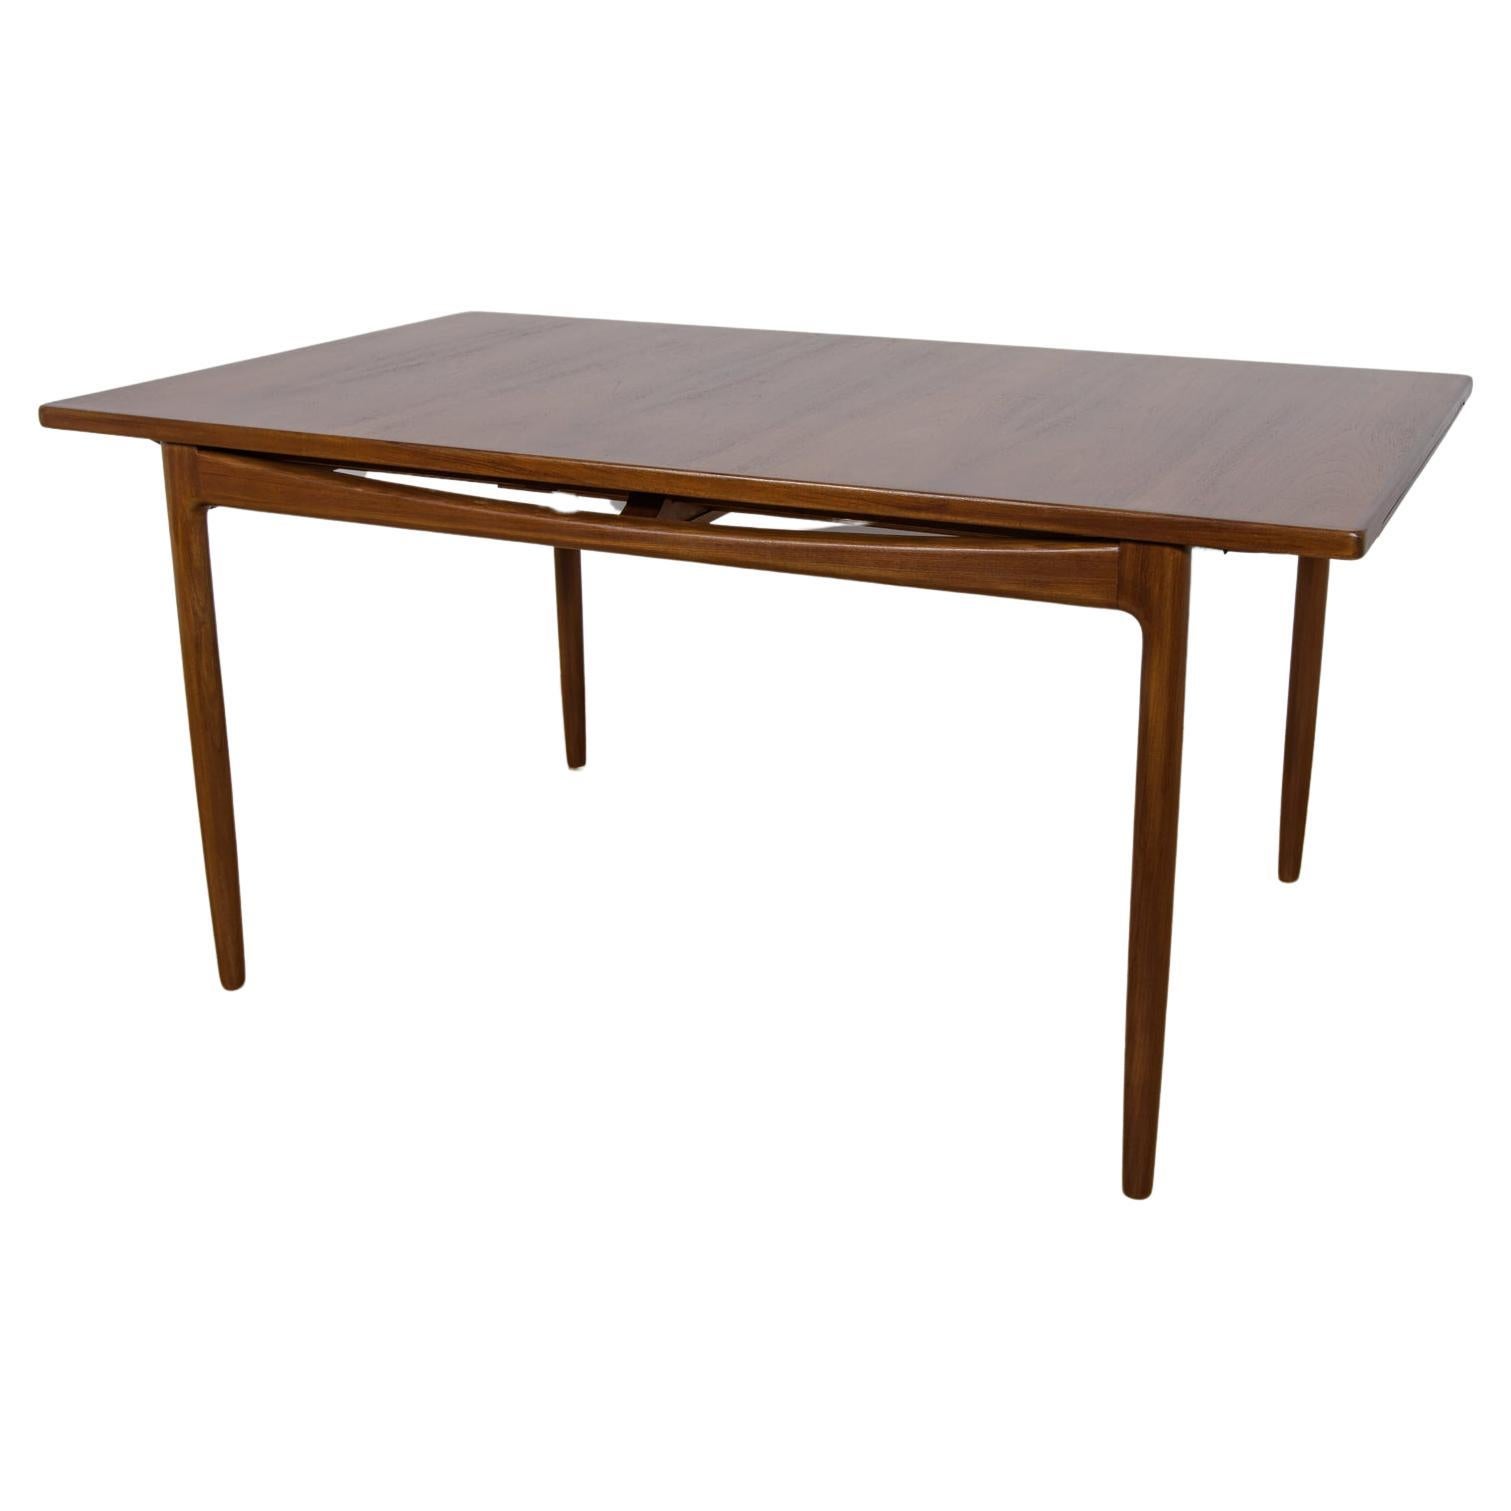 Mid-Century Dining Table by Ib Kofod Larsen for G-Plan, 1960s